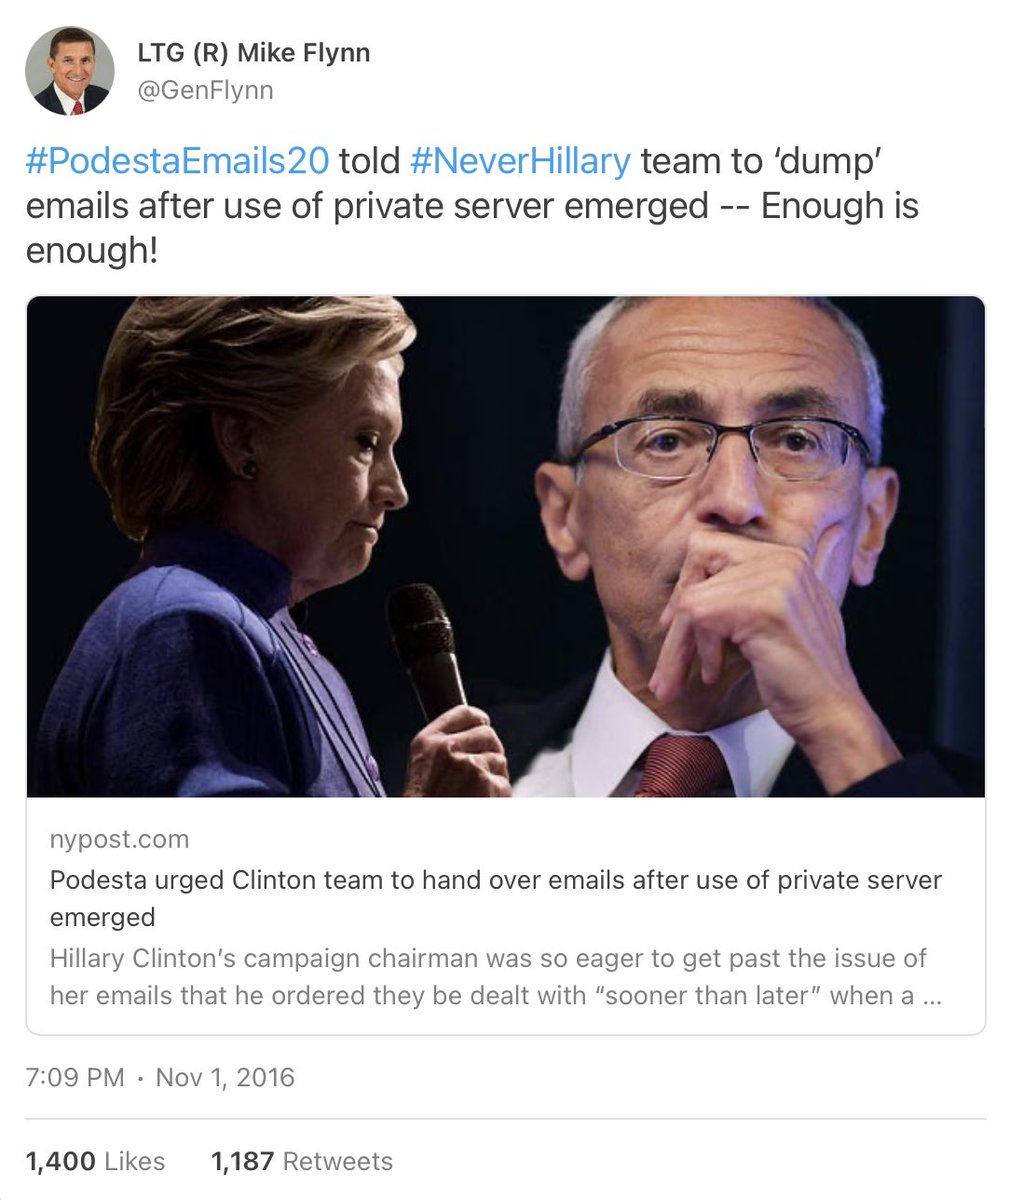 The primary job of MAGA3X was to run psyops to torpedo the candidacy of Hillary Clinton — most famously #Pizzagate which Flynn promoted directly.

Pizzagate was based on John Podesta’s emails which were stolen by the Russians and distributed through Russian cutout Wikileaks.